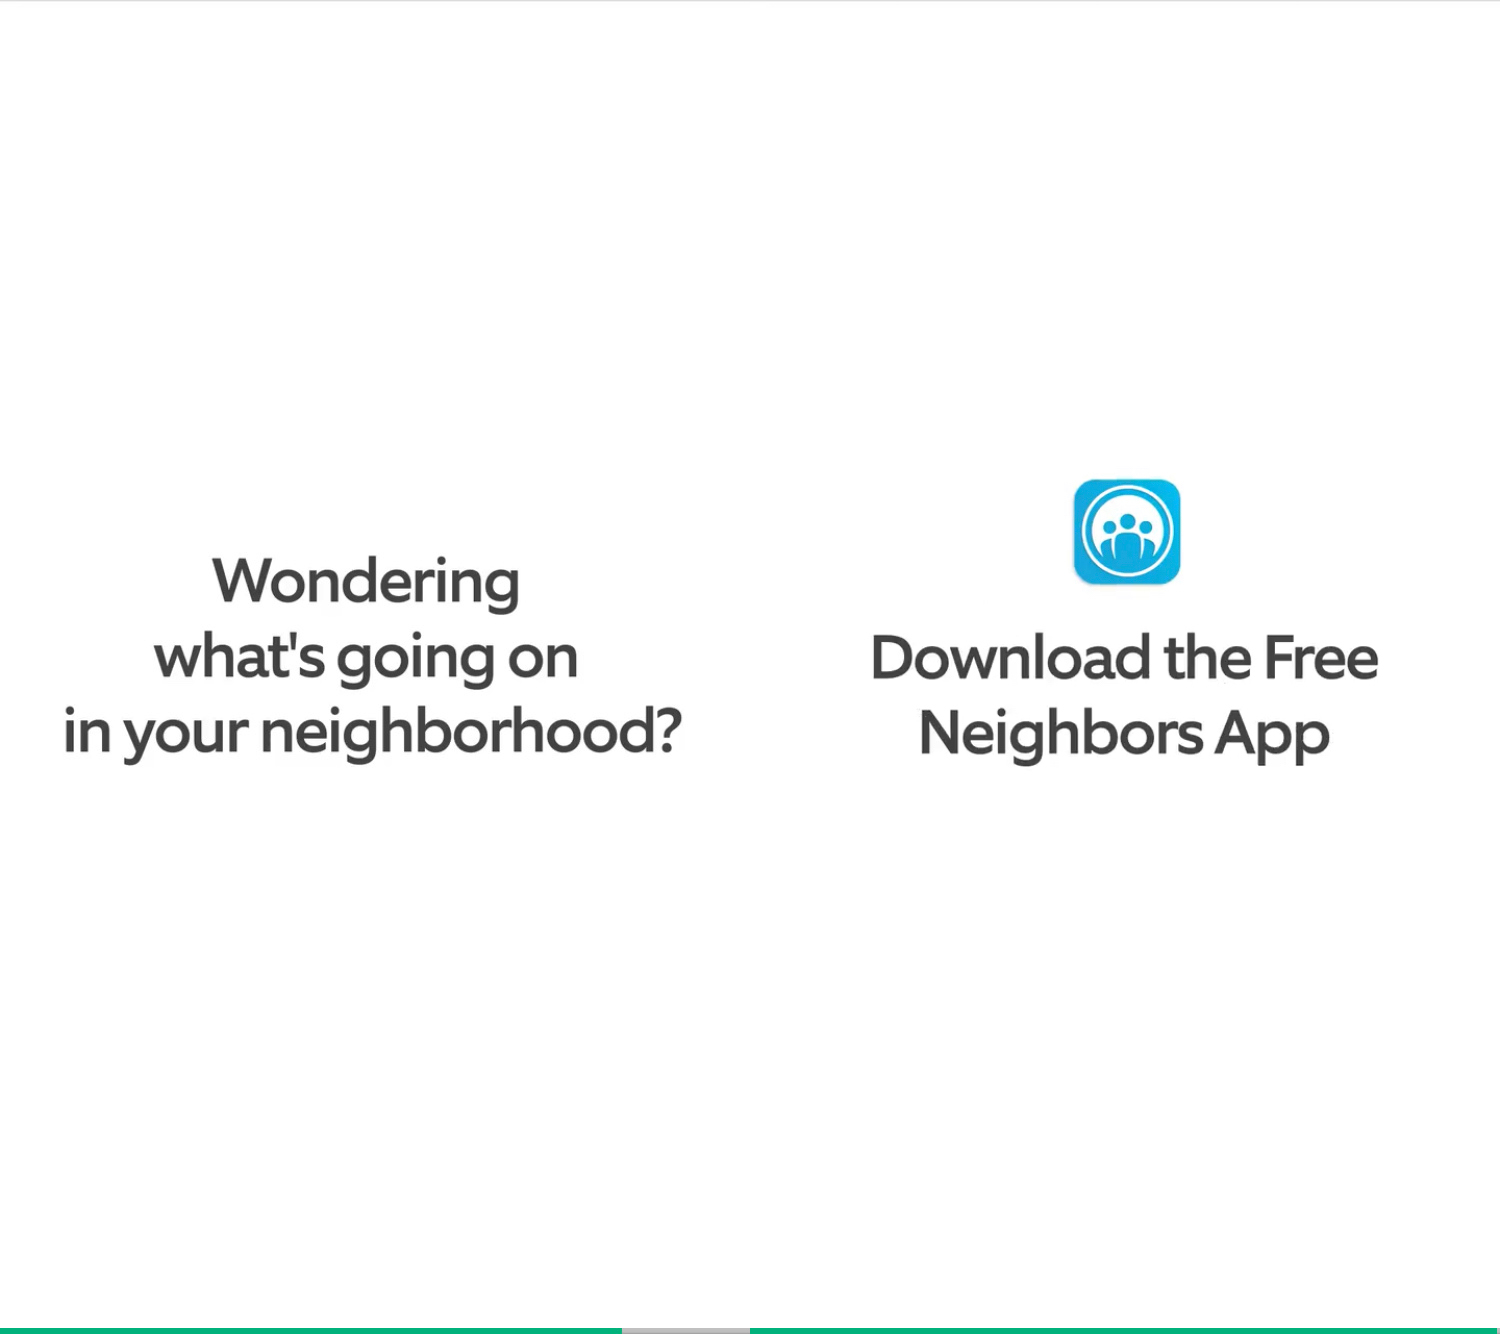 Figure 1: Screenshots of a two-image Instagram ad I received for Ring Neighbors (read left to right). Screenshots recorded by author February 12, 2019.